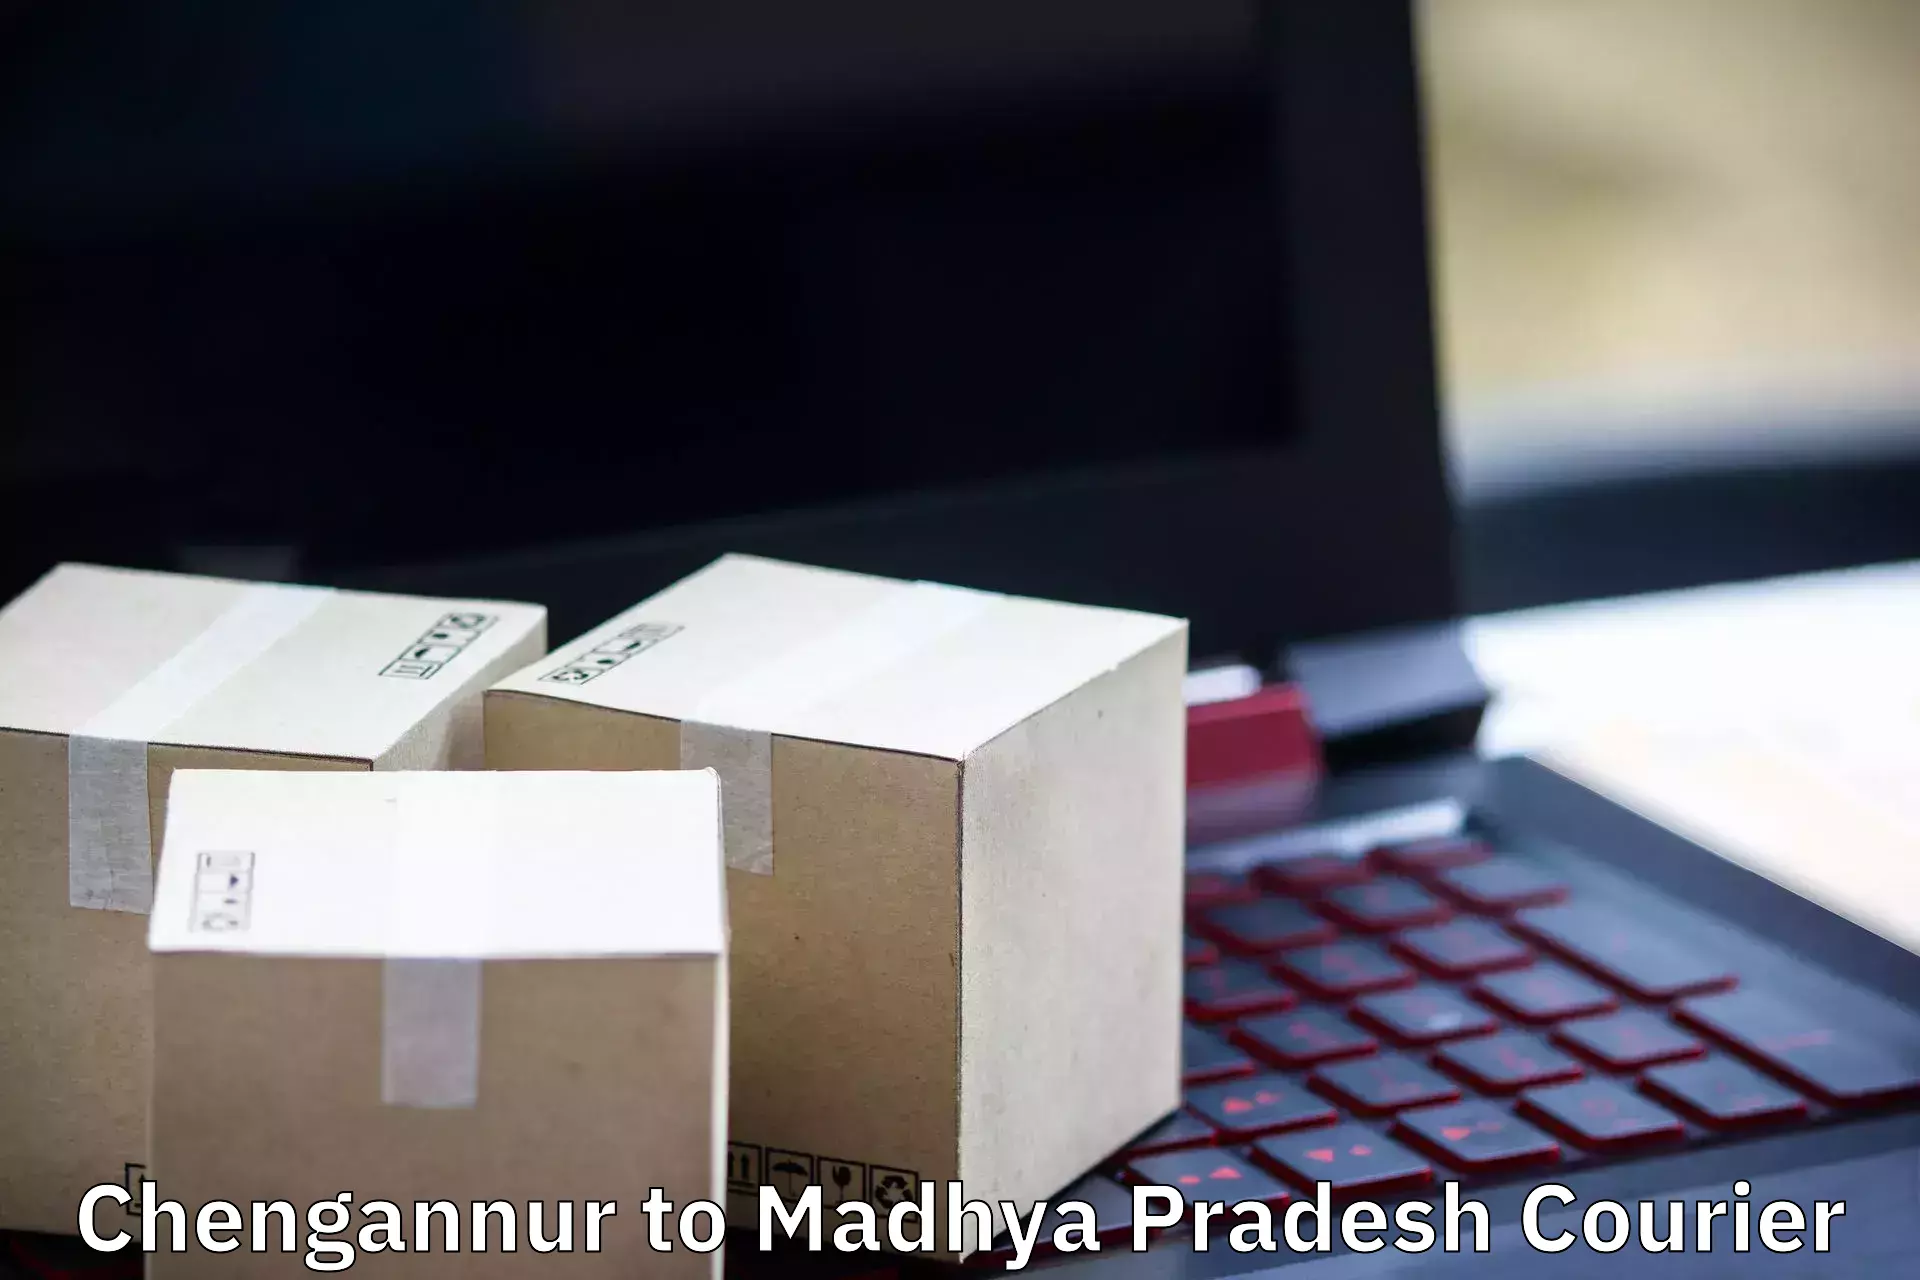 Professional moving company in Chengannur to Niwari